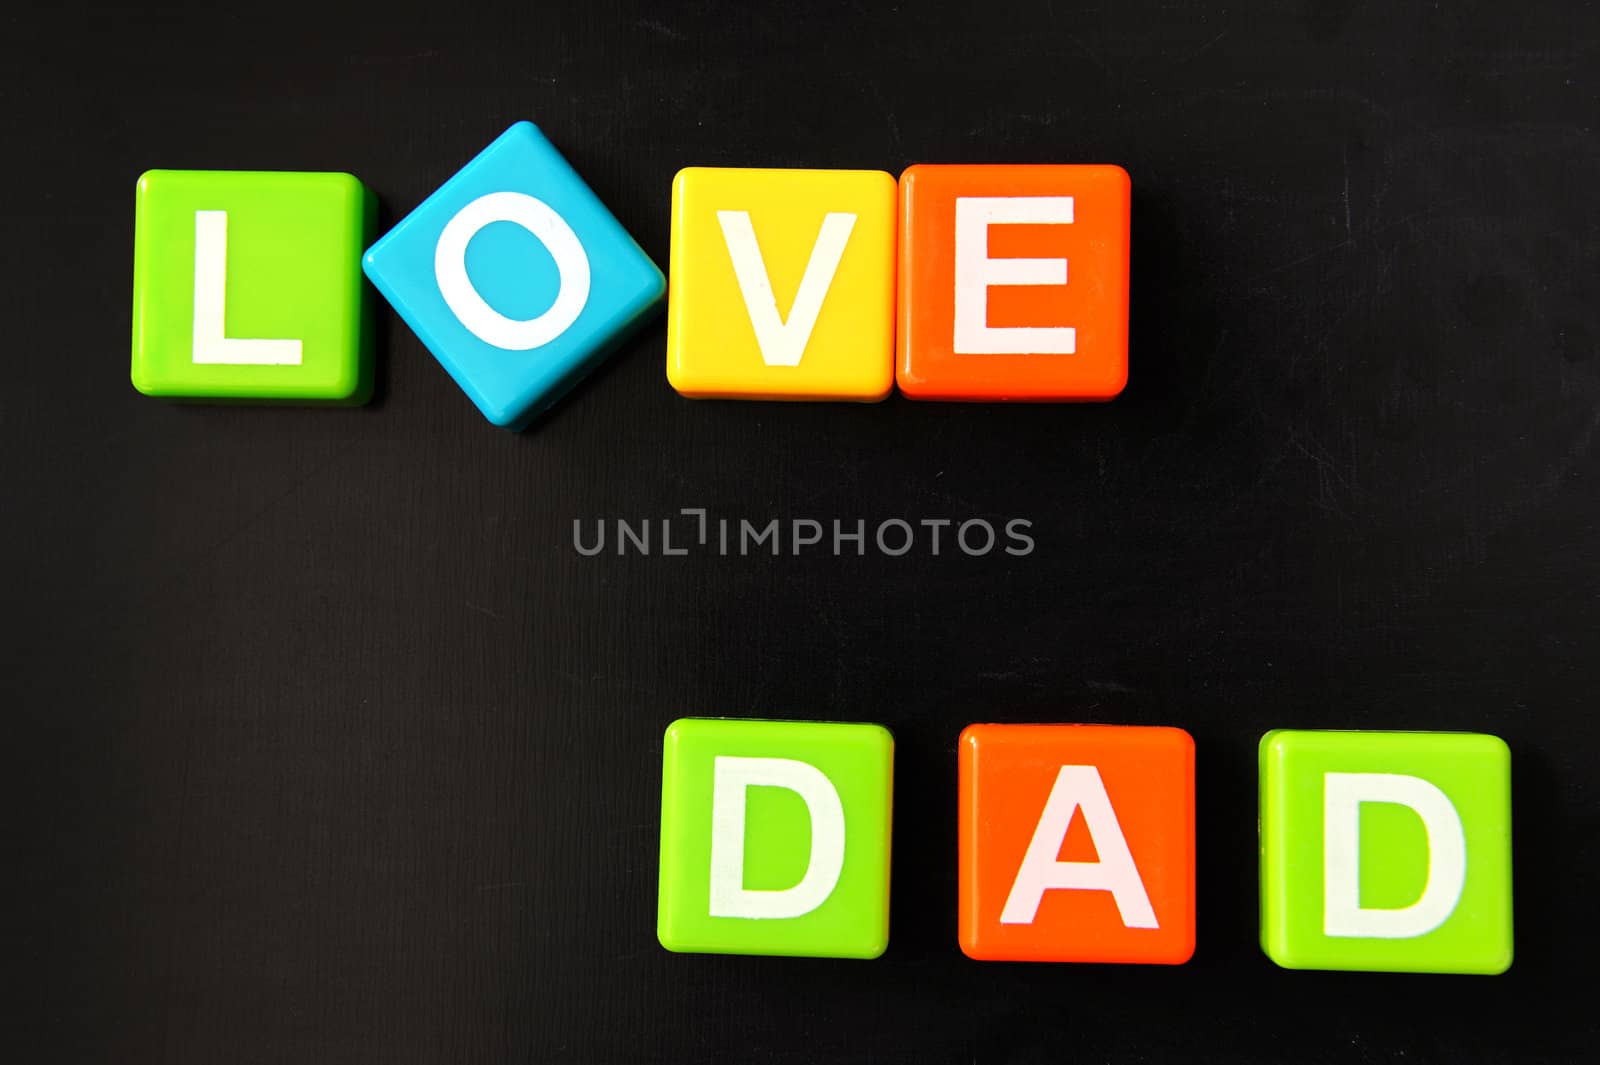 Love dad by raywoo